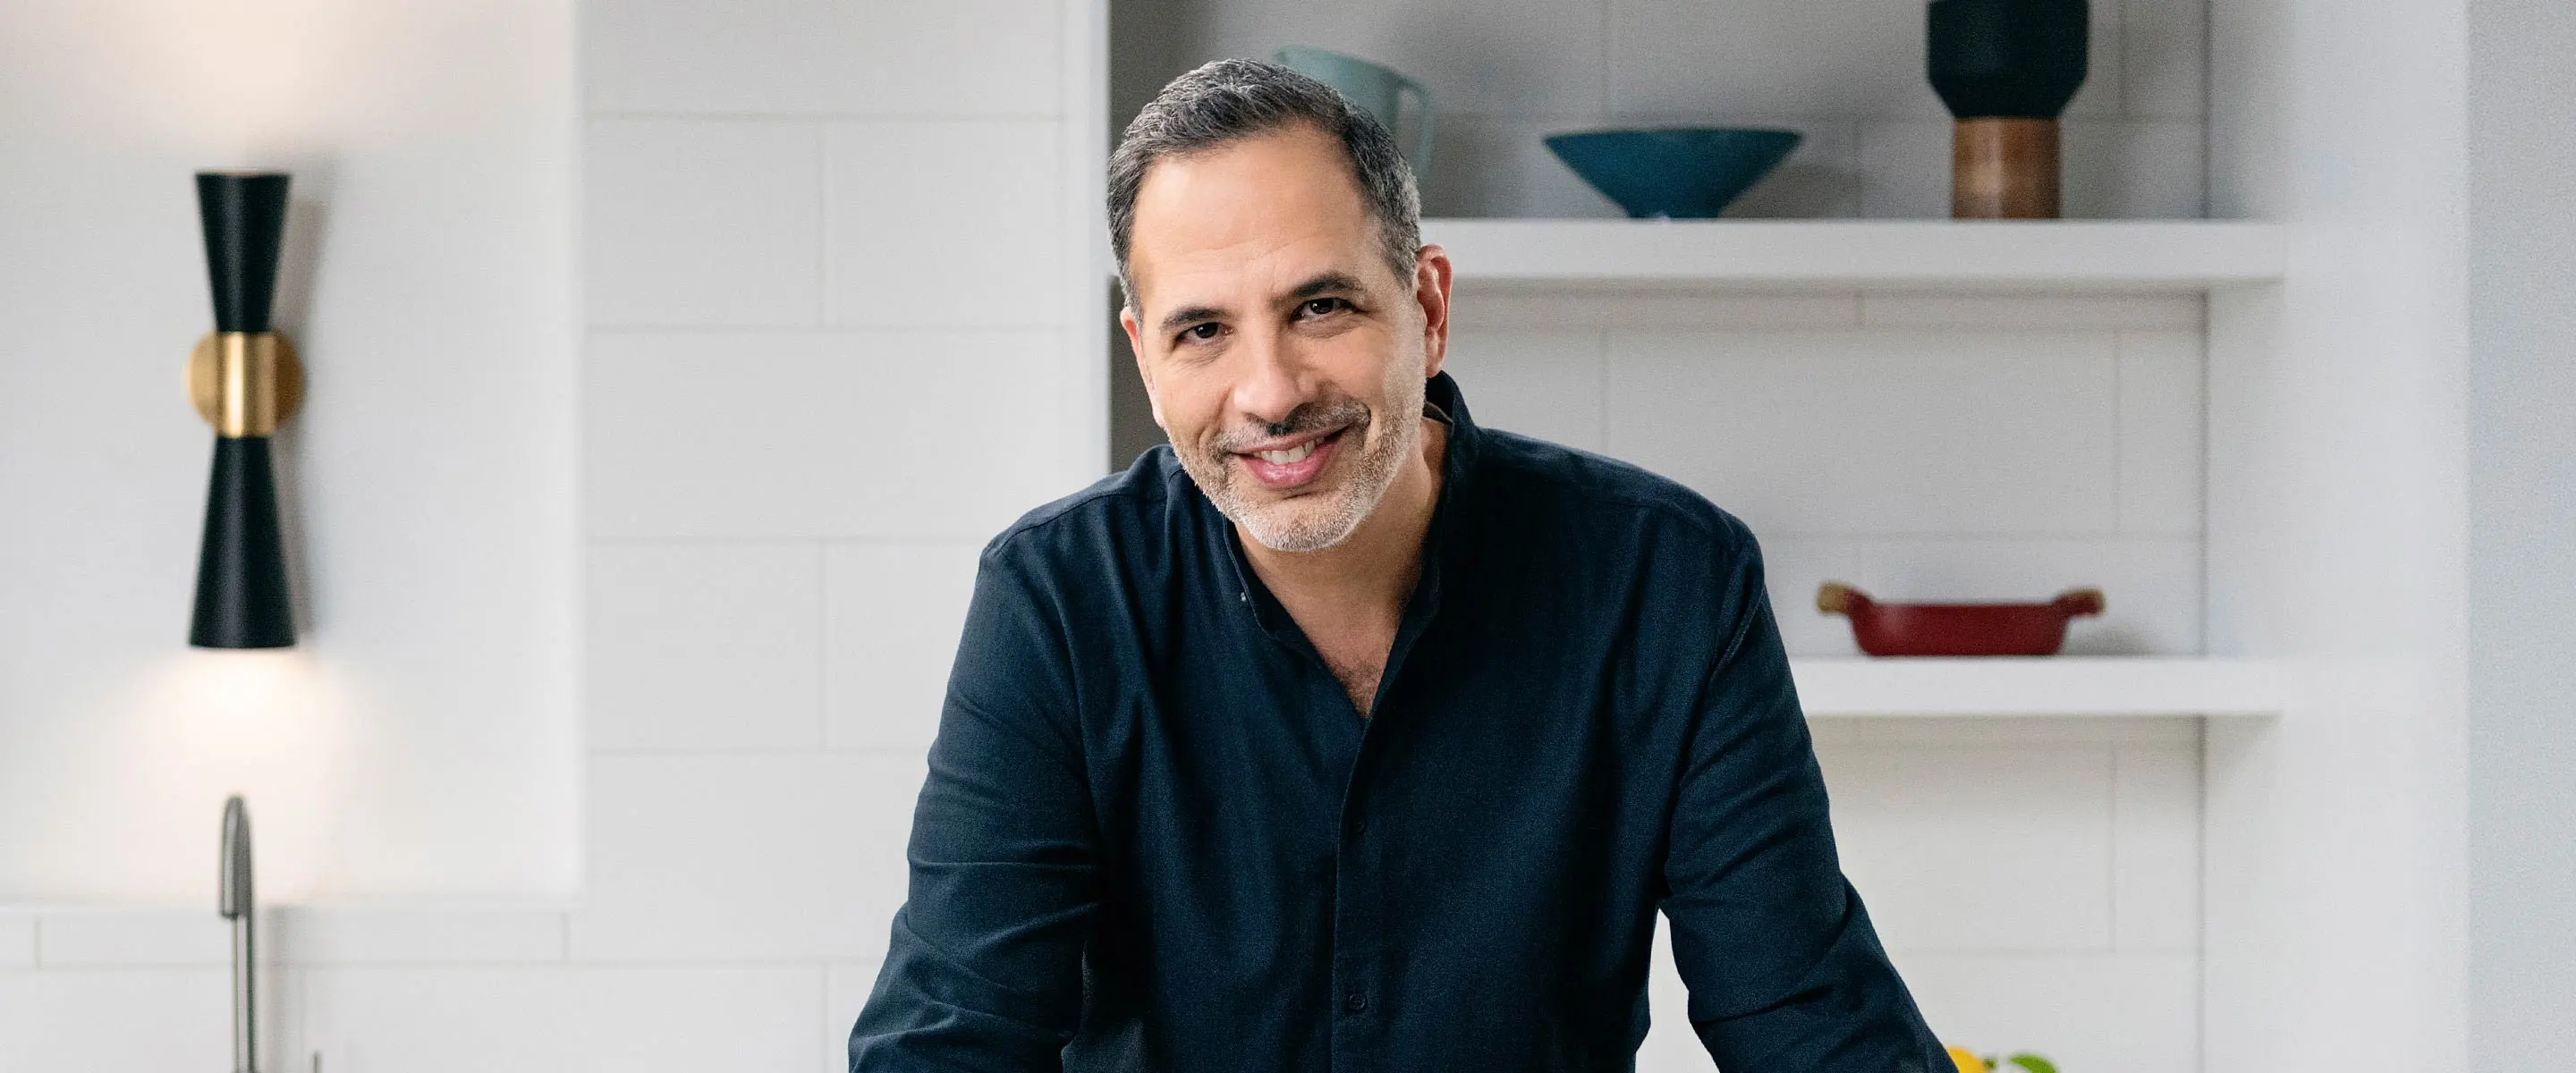 Yotam Ottolenghi Teaches Modern Middle Eastern Cooking